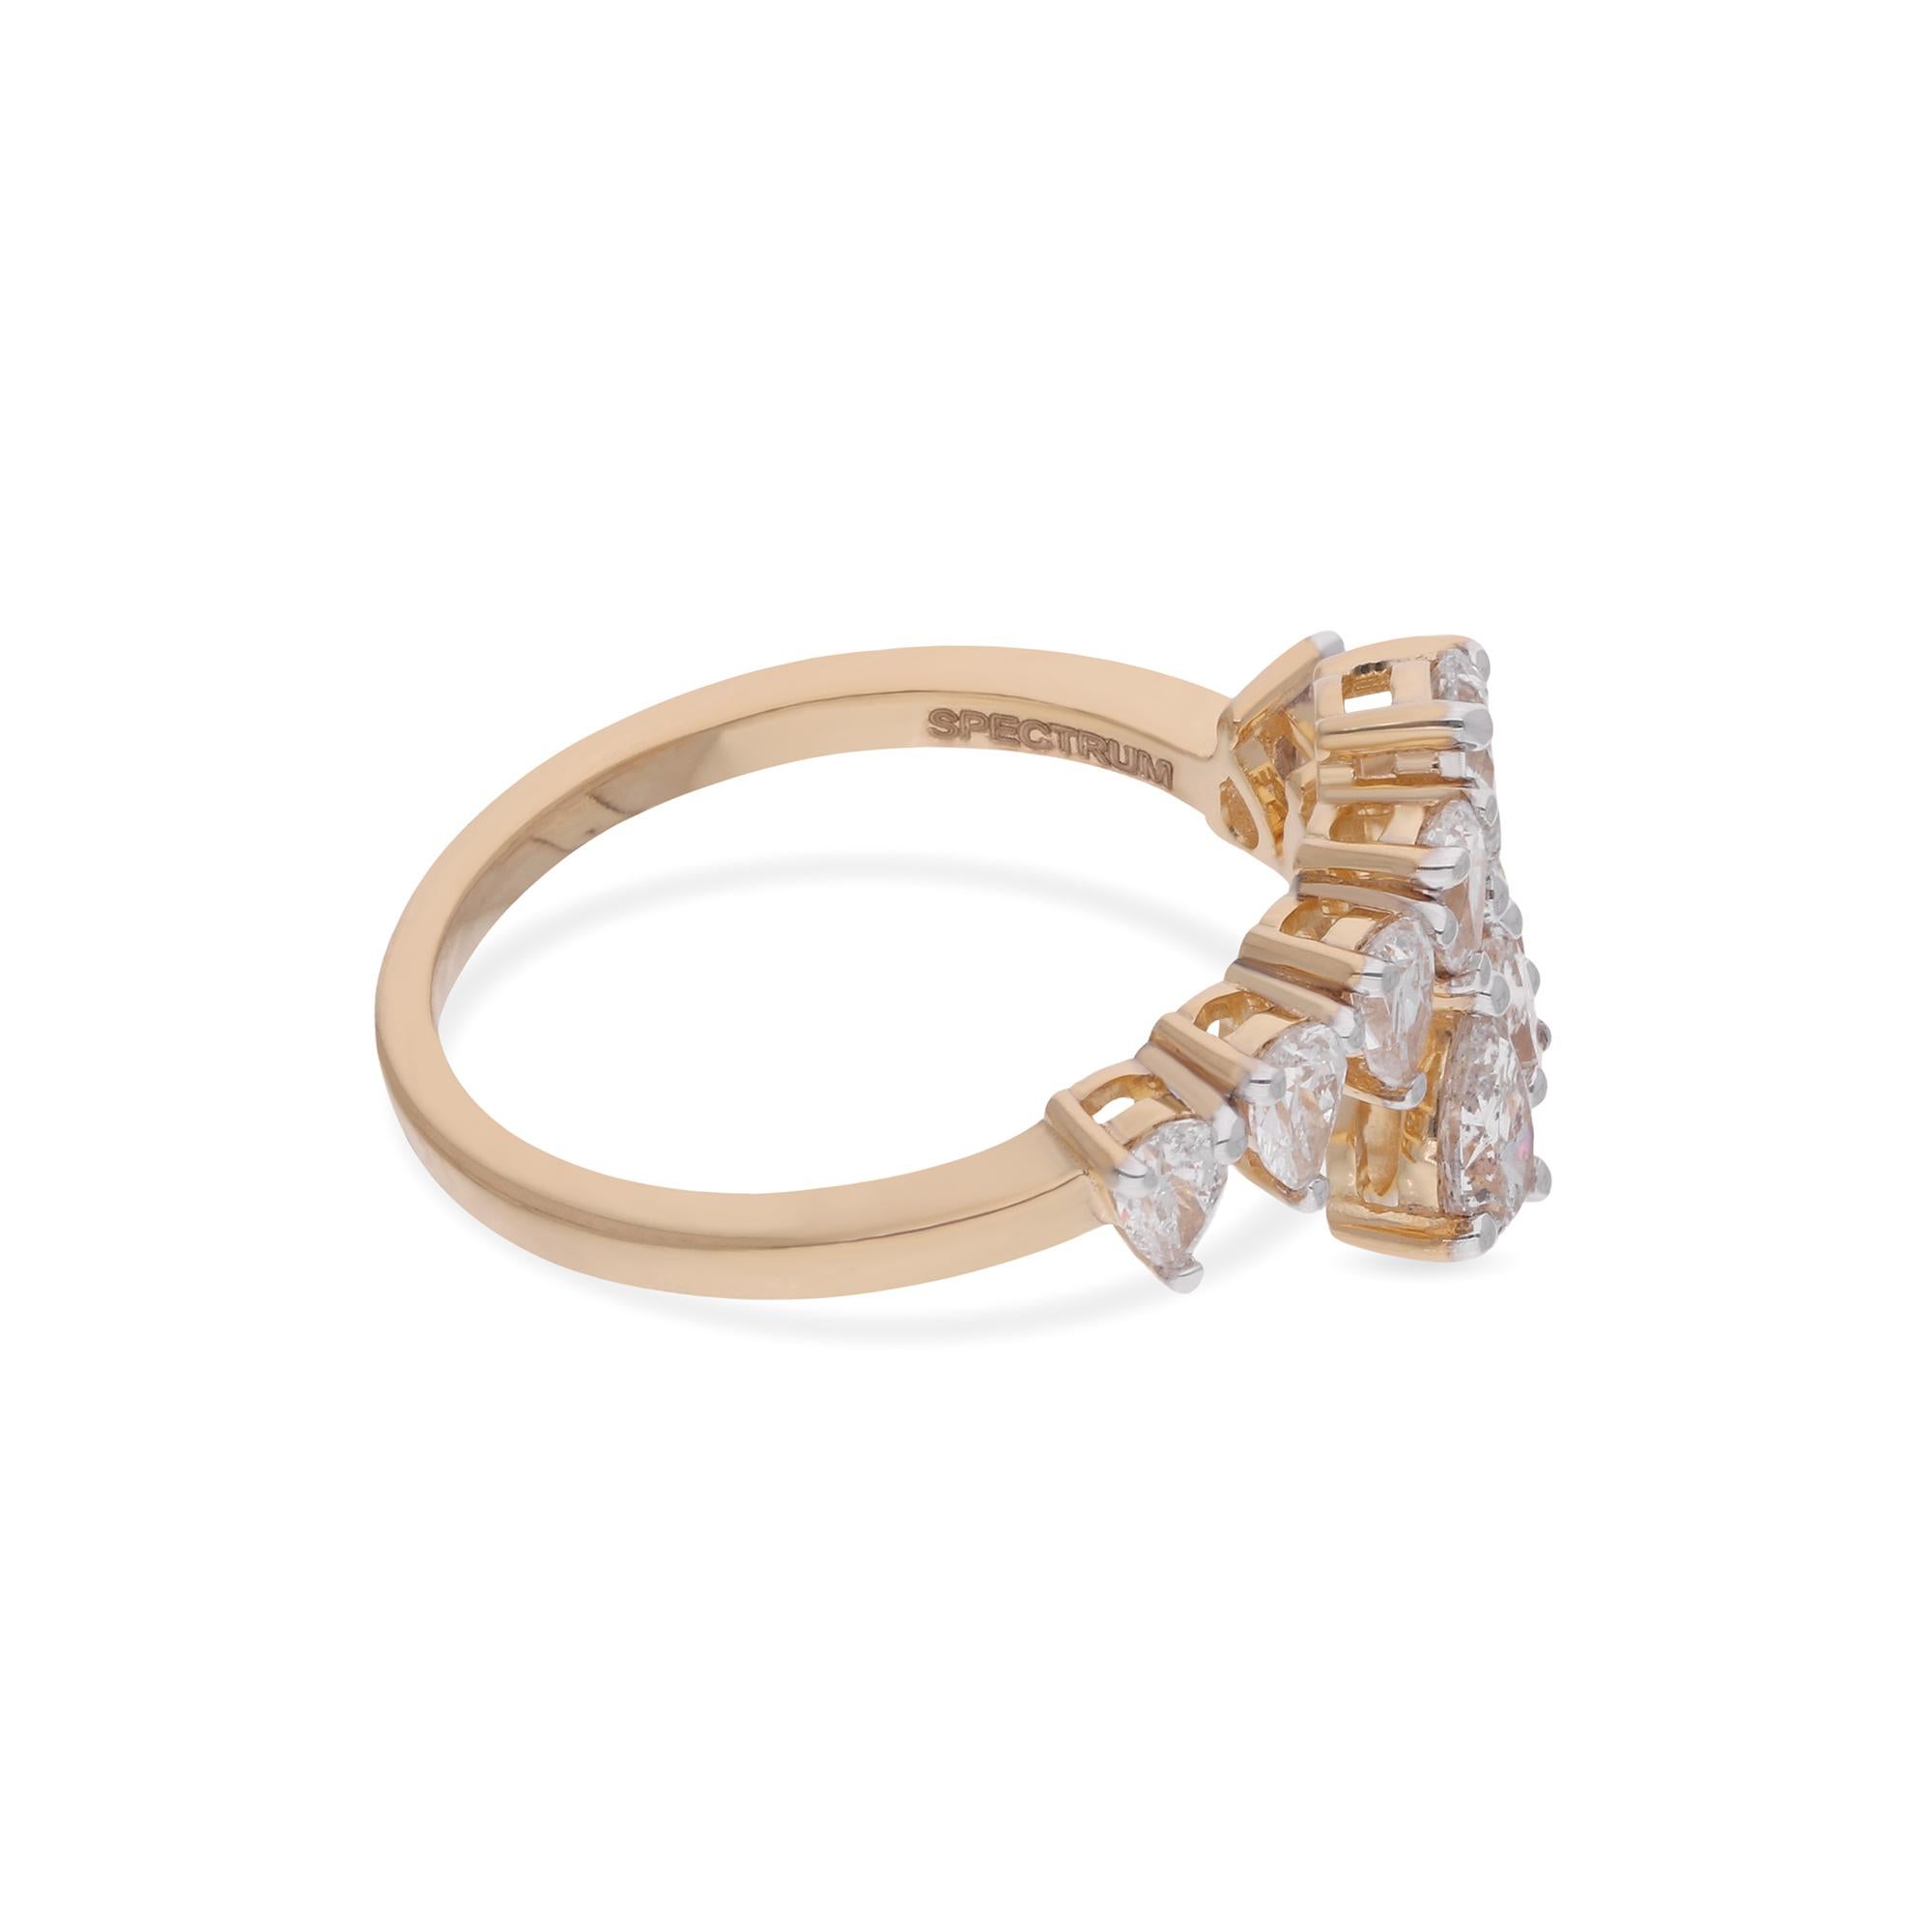 Elevate your style with the understated elegance of this Real 0.9 Carat Diamond Wrap Ring, crafted with meticulous attention to detail in radiant 18 karat yellow gold. A true embodiment of sophistication, this ring features a genuine 0.9 carat